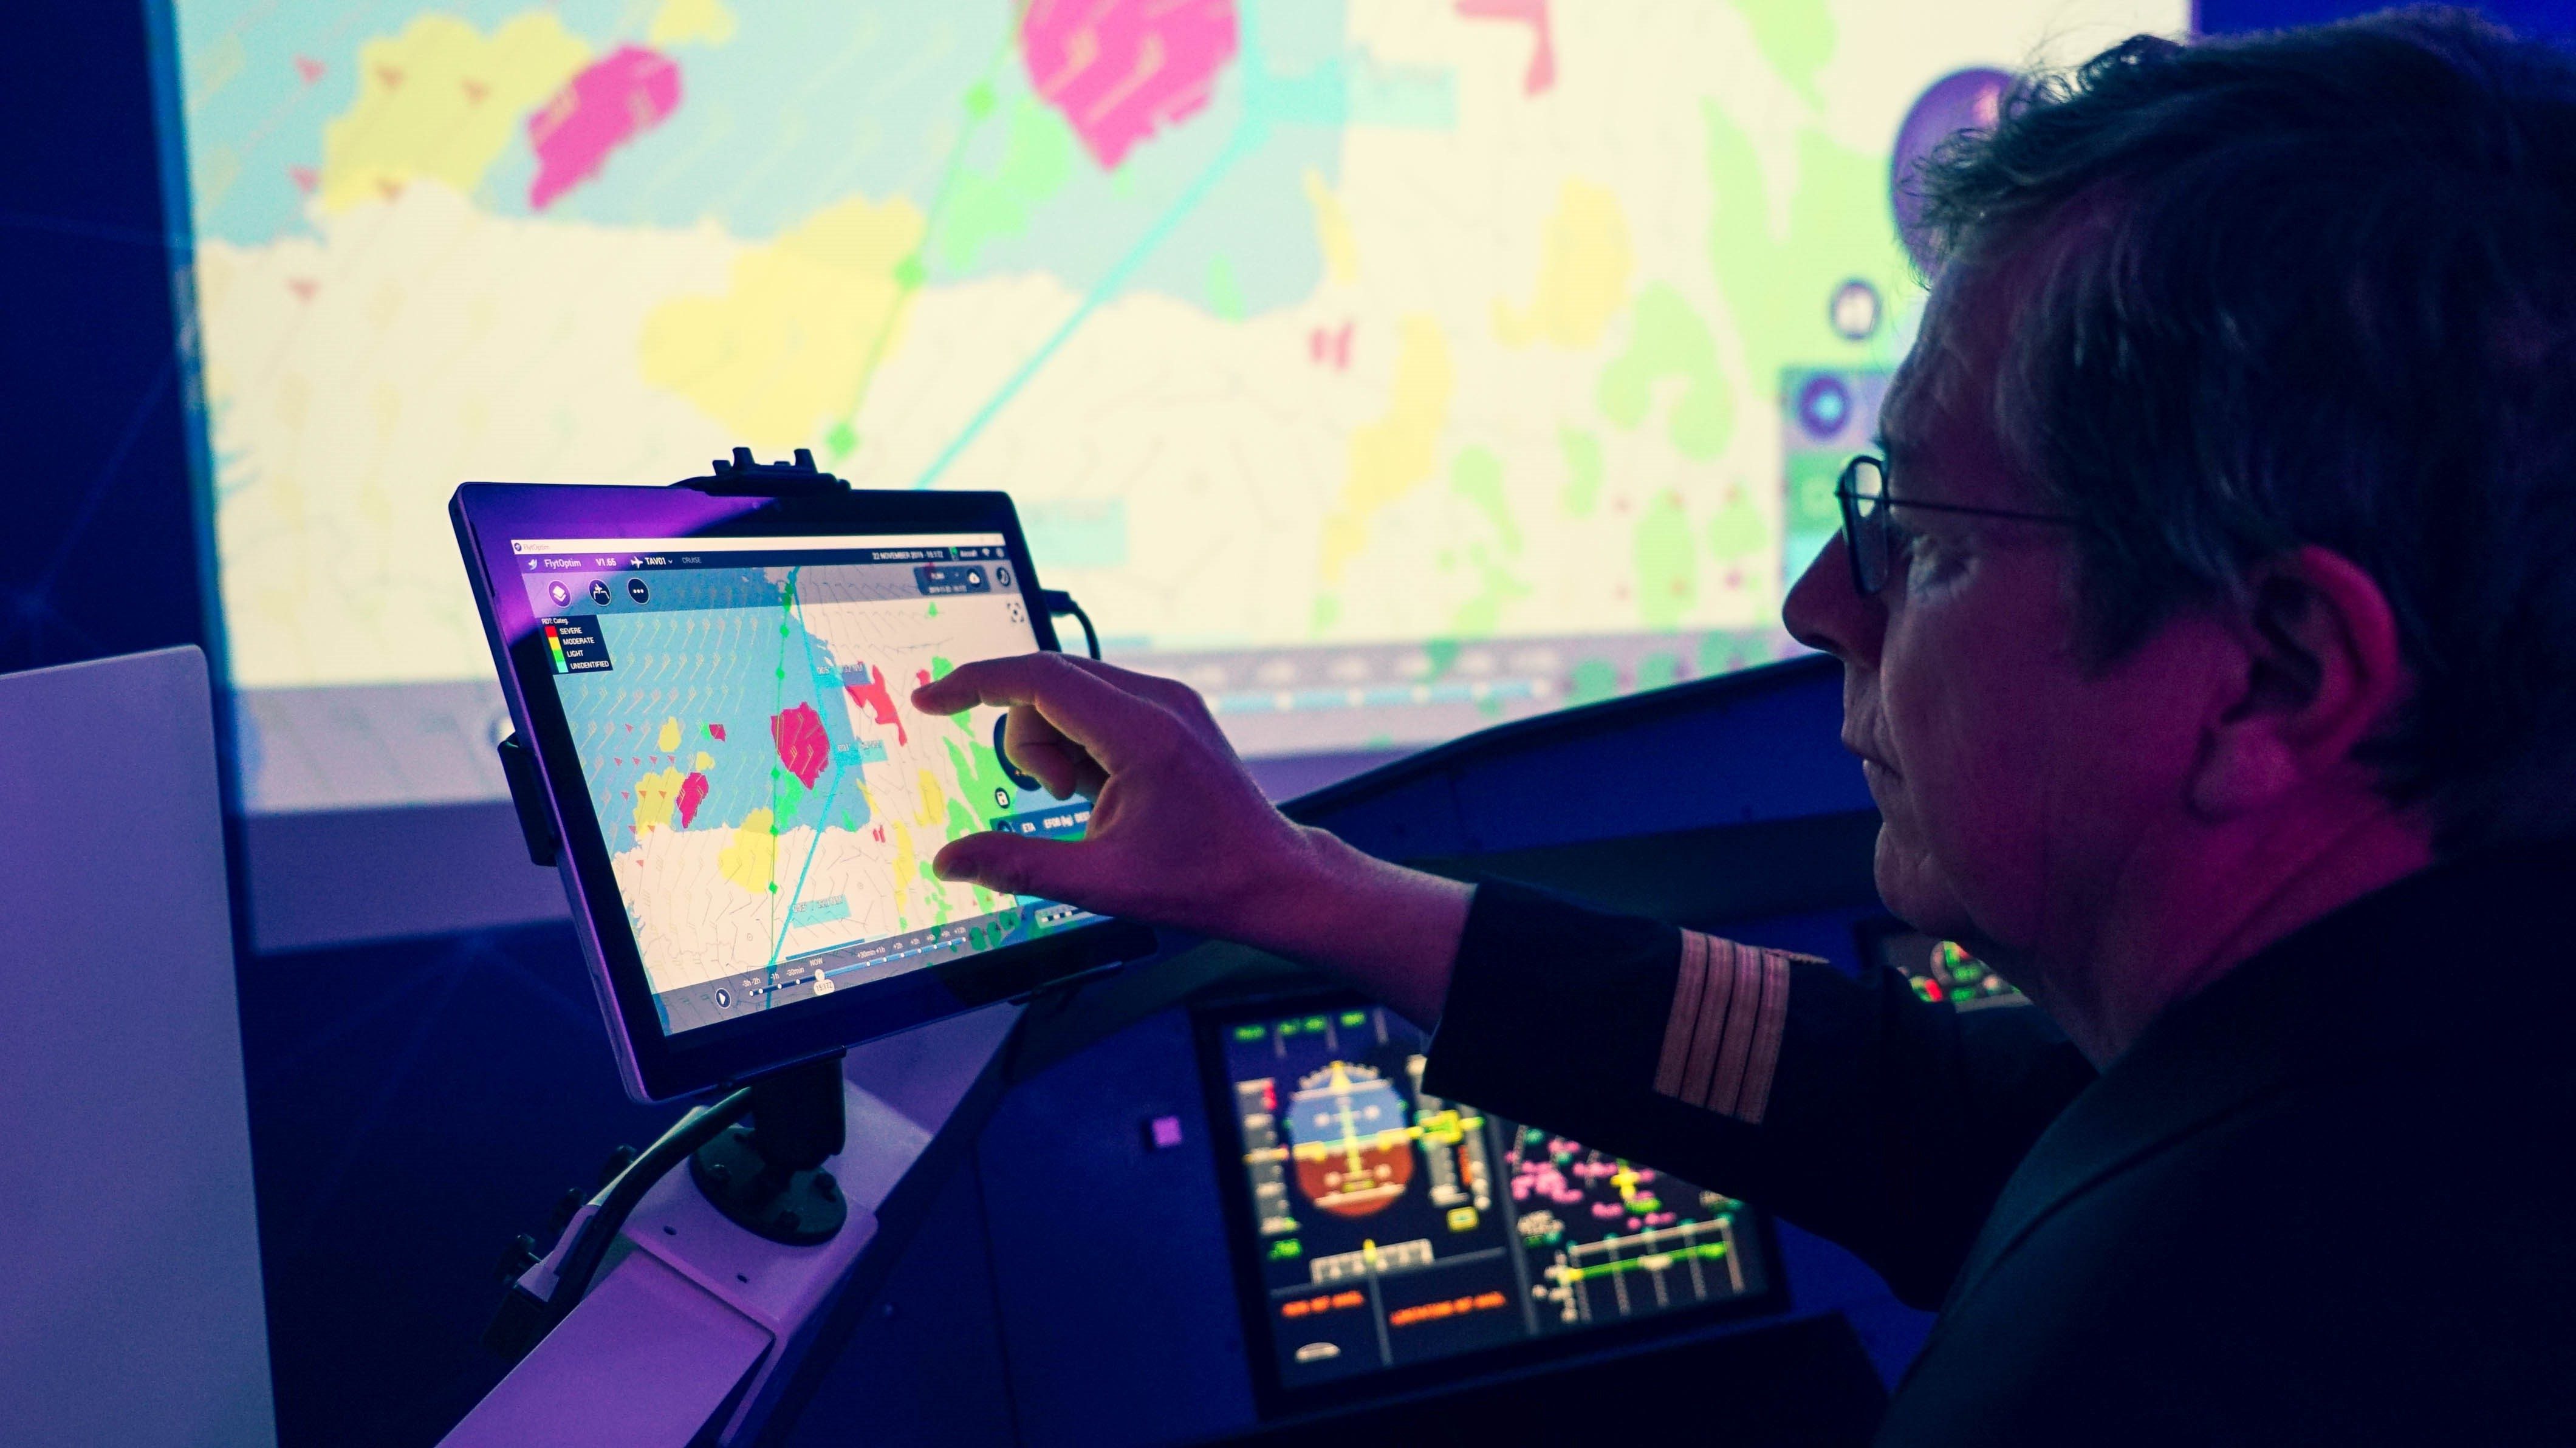 PureFlyt closes the gap between the flight management system and the electronic flight bag – making pilots' work easier and helping to save fuel and CO2 emissions.